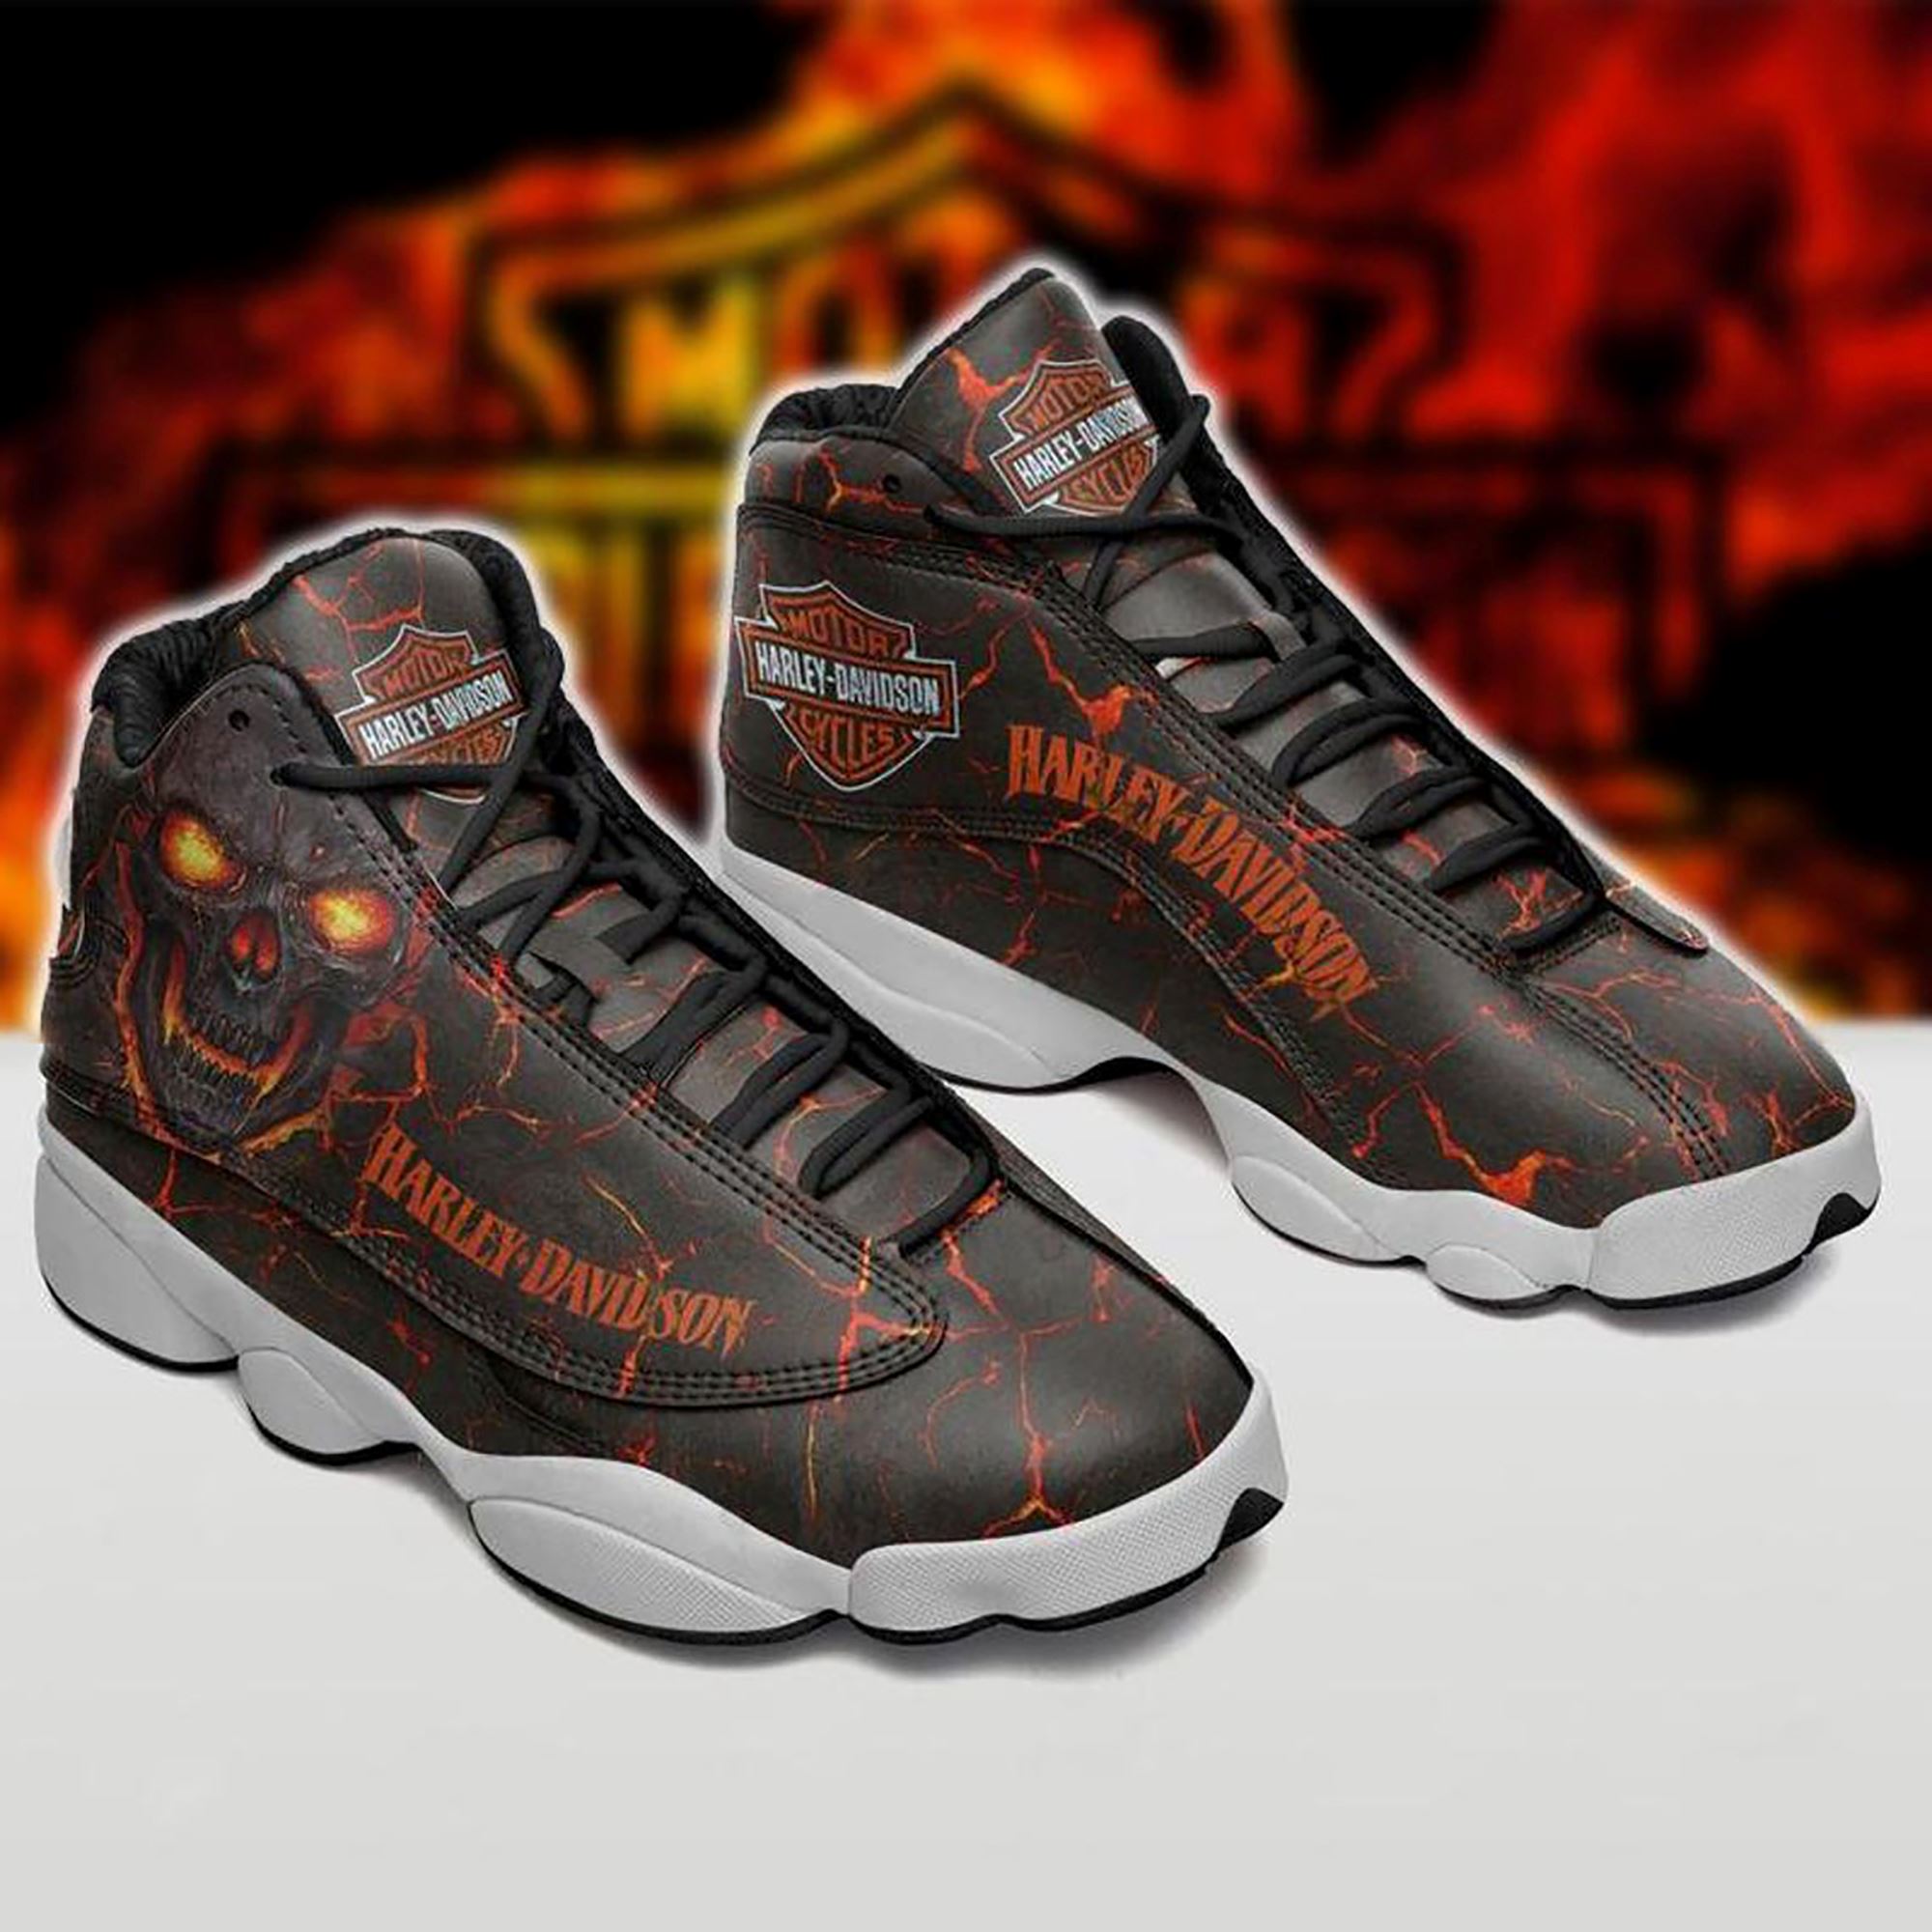 Harley Davidson Gifts Harley Davidson Air JD 13 Sneakers Classic Motorcycle Shoes Motorcycle Shoes Sneaker